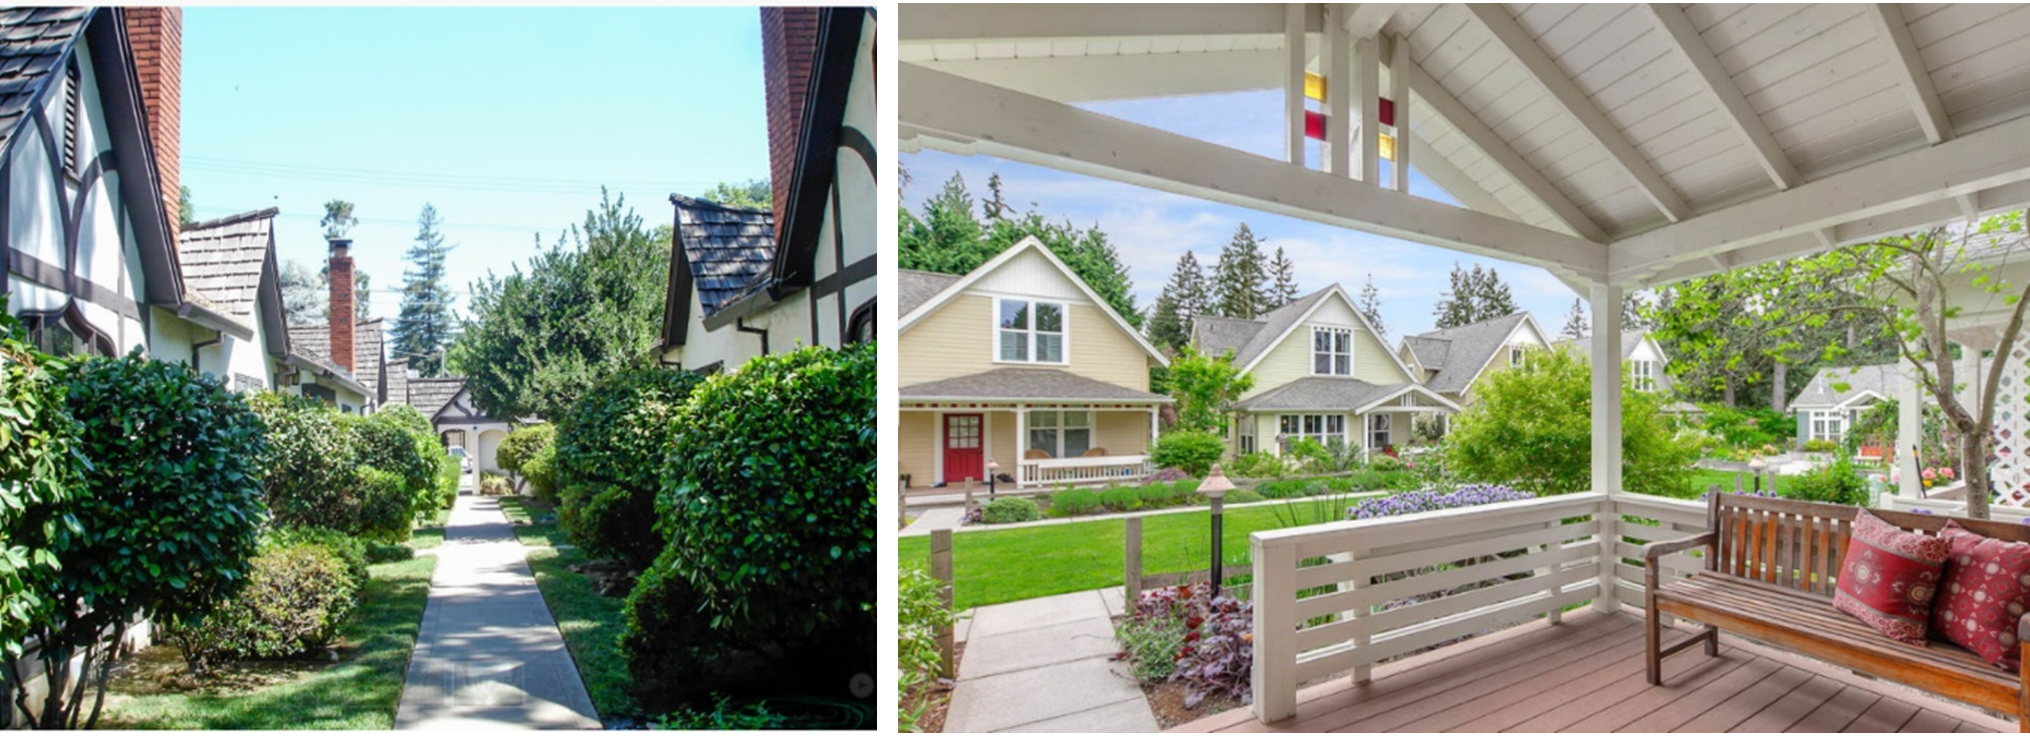 Visual examples of cottage homes around a common courtyard or green space: Credit:  